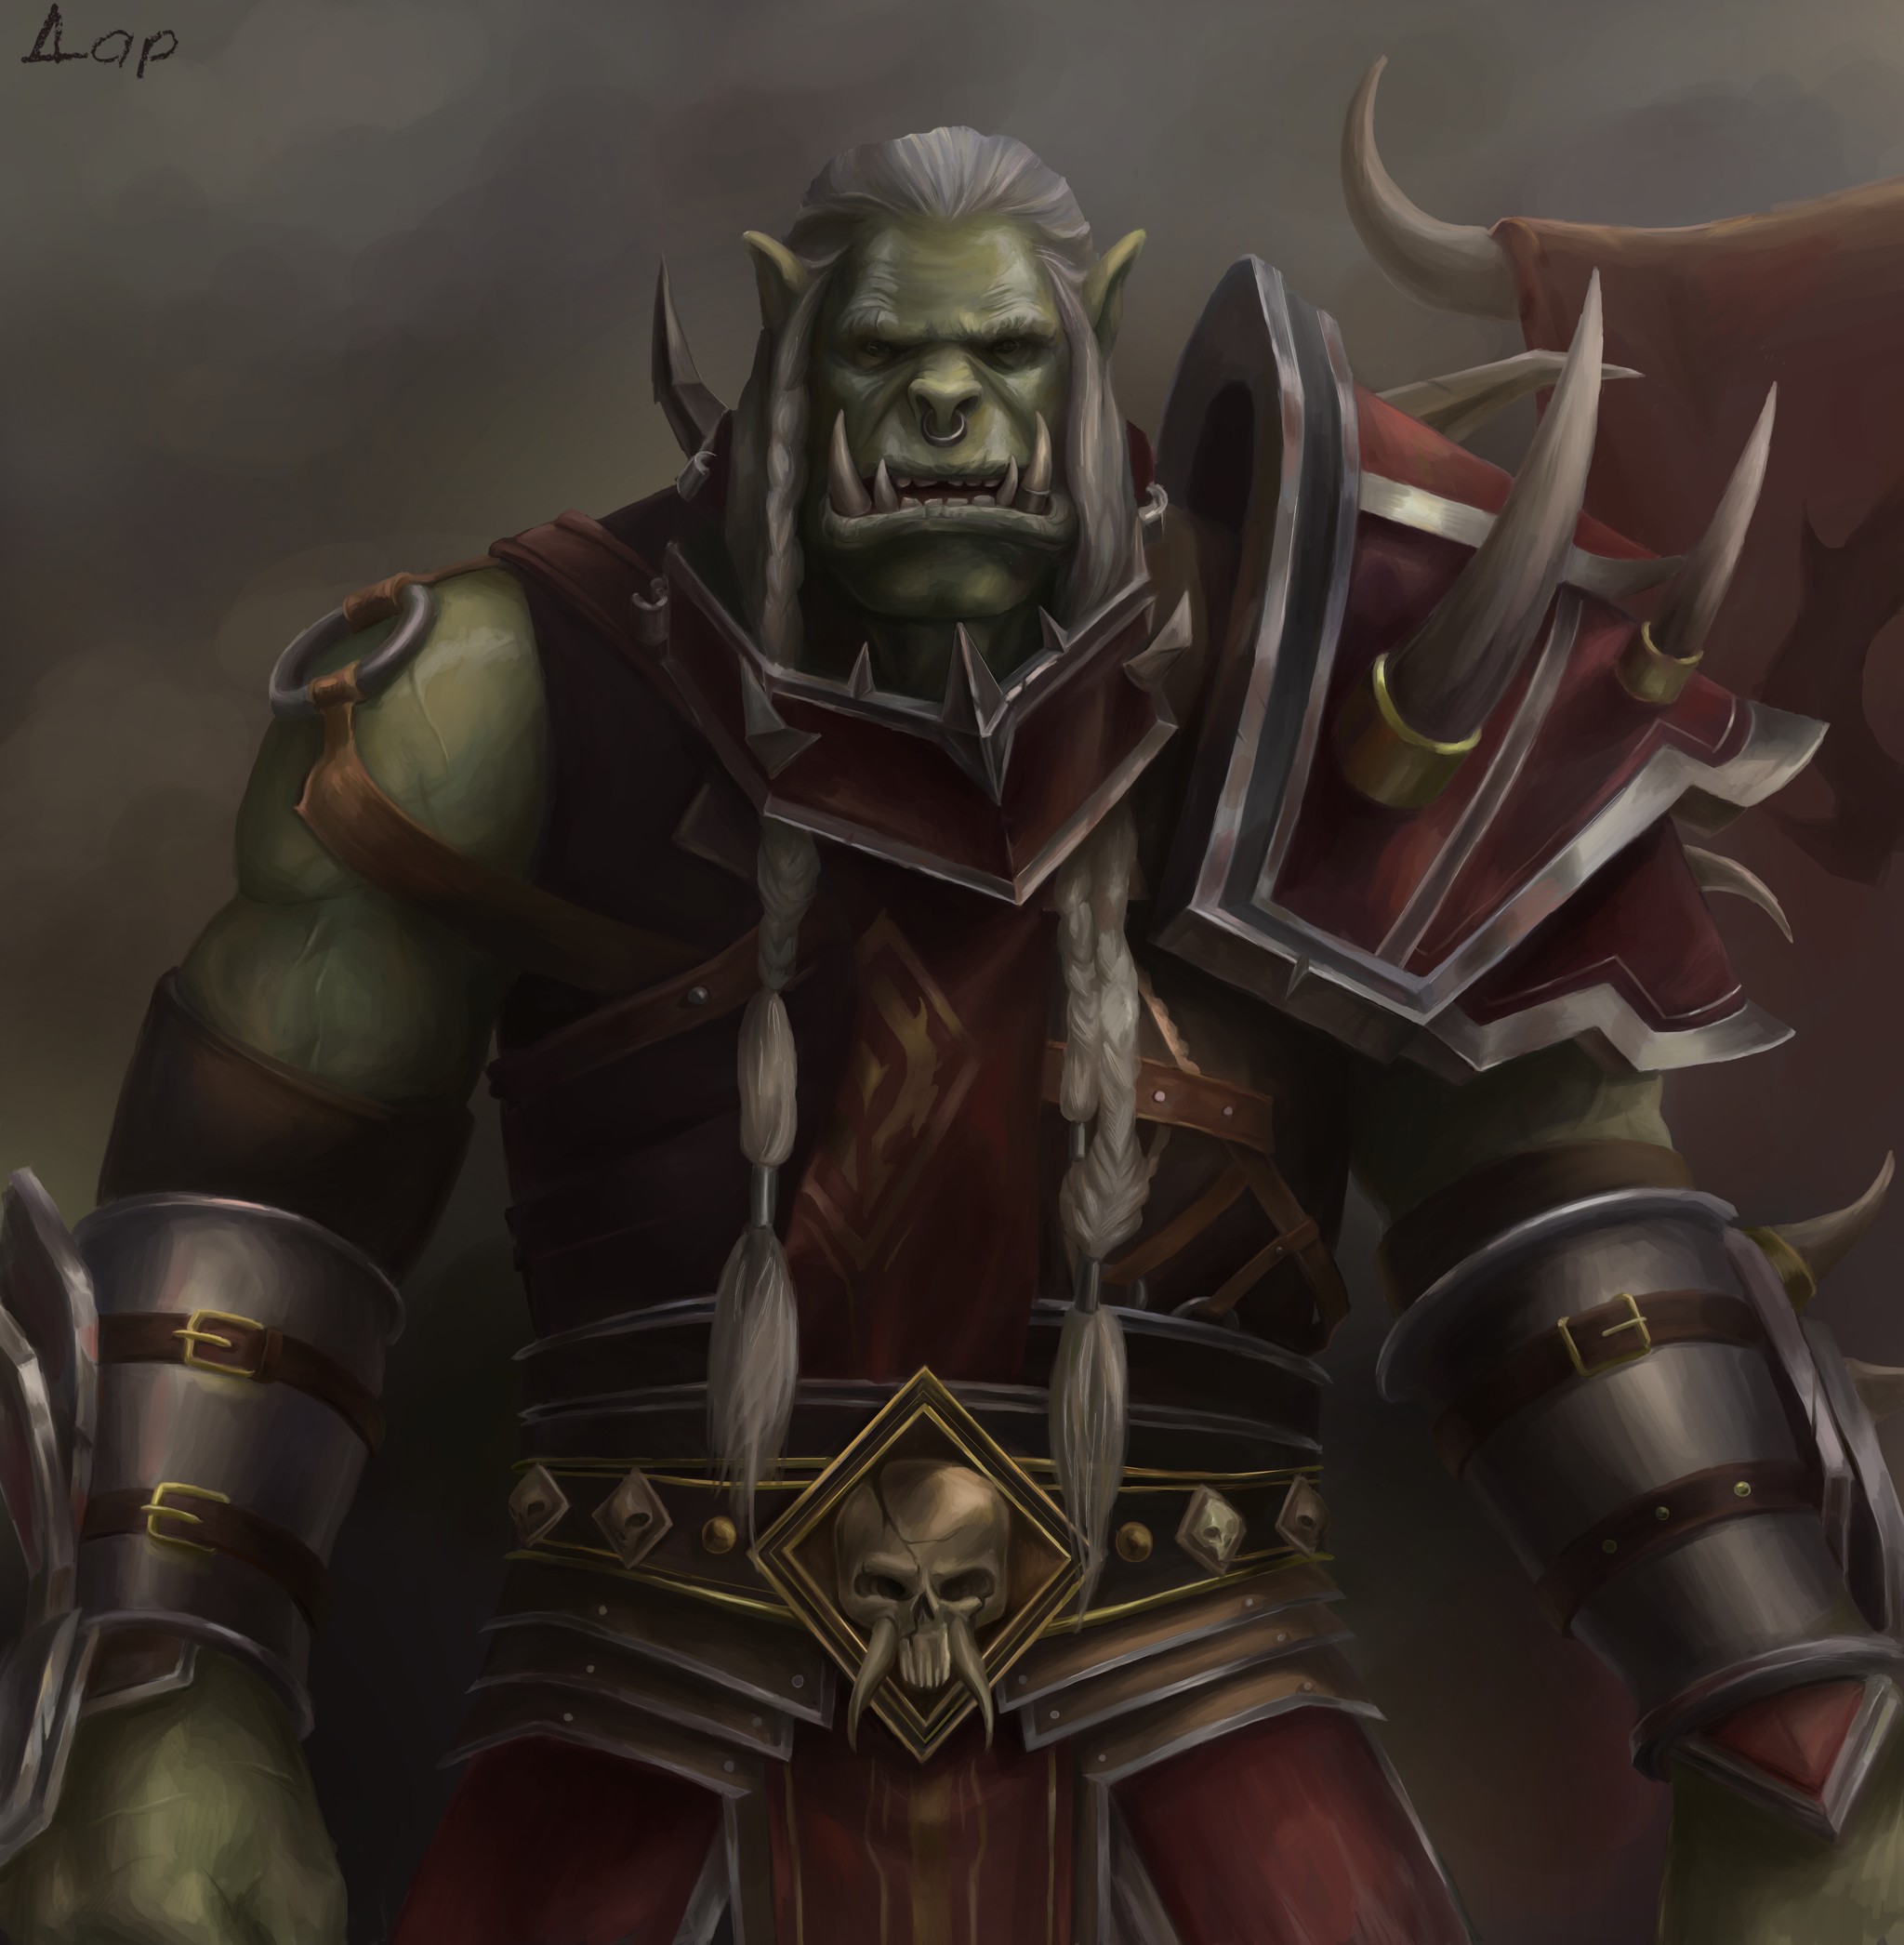 High Overlord - Warcraft, World of warcraft, Battle for Azeroth, Orcs, Art